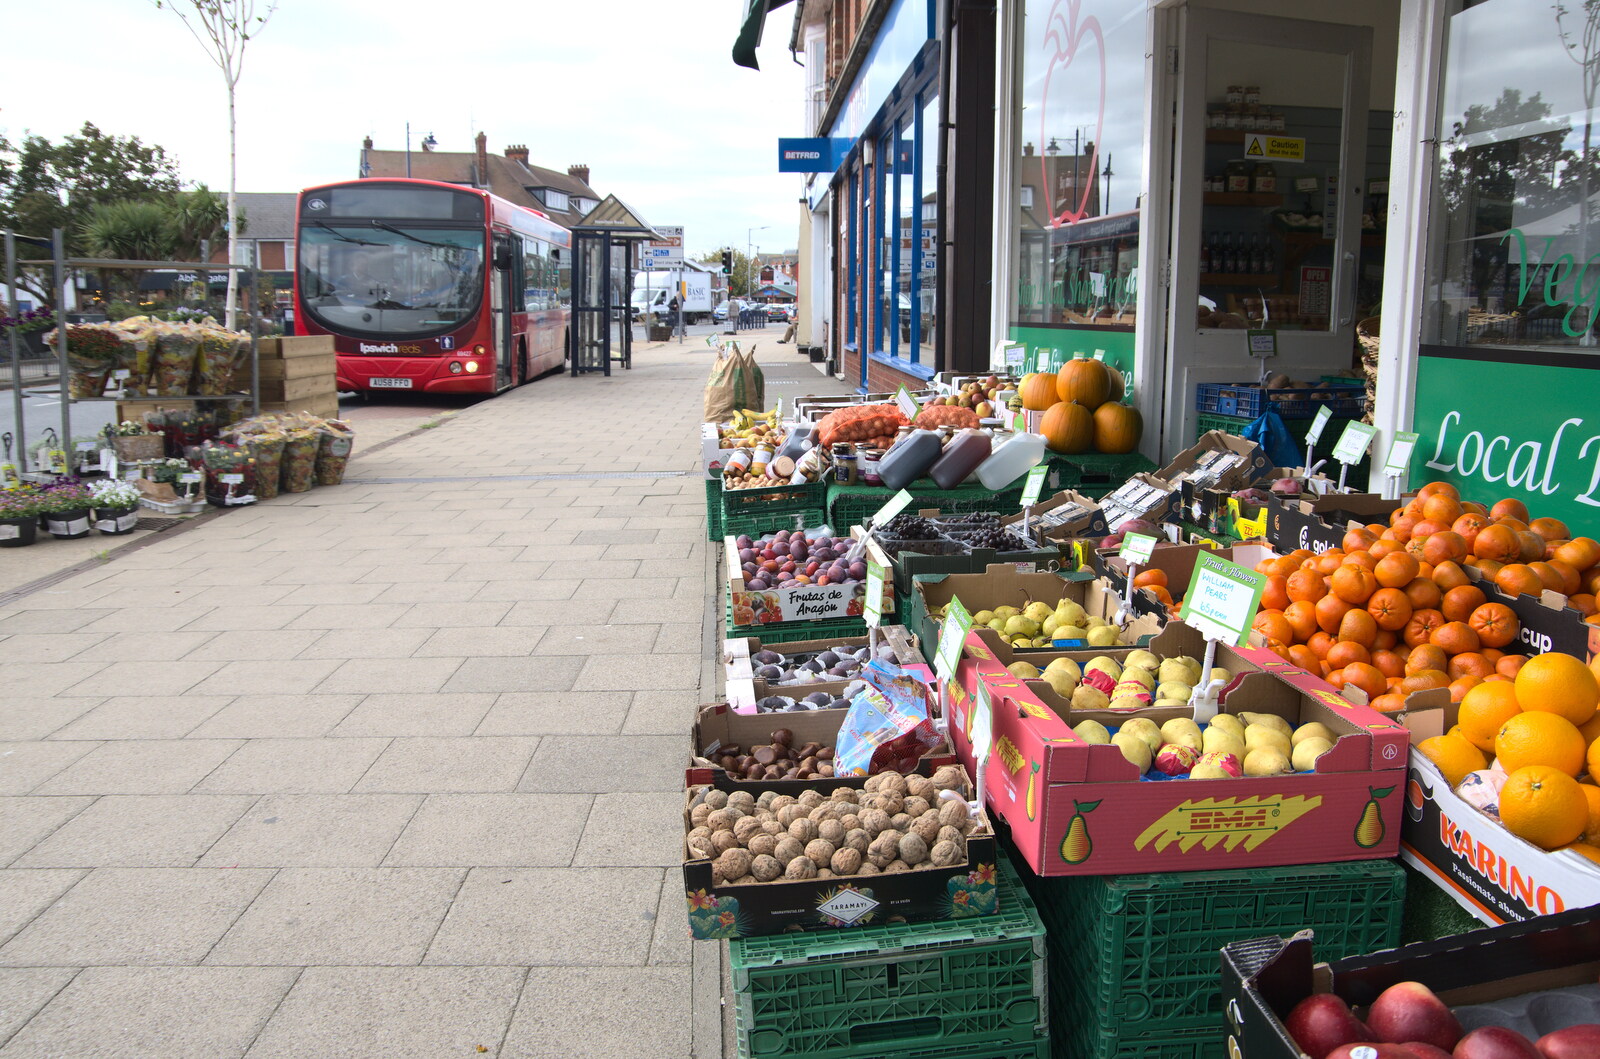 A bus, and the greengrocer next door from A Postcard from Felixstowe, Suffolk - 5th October 2022